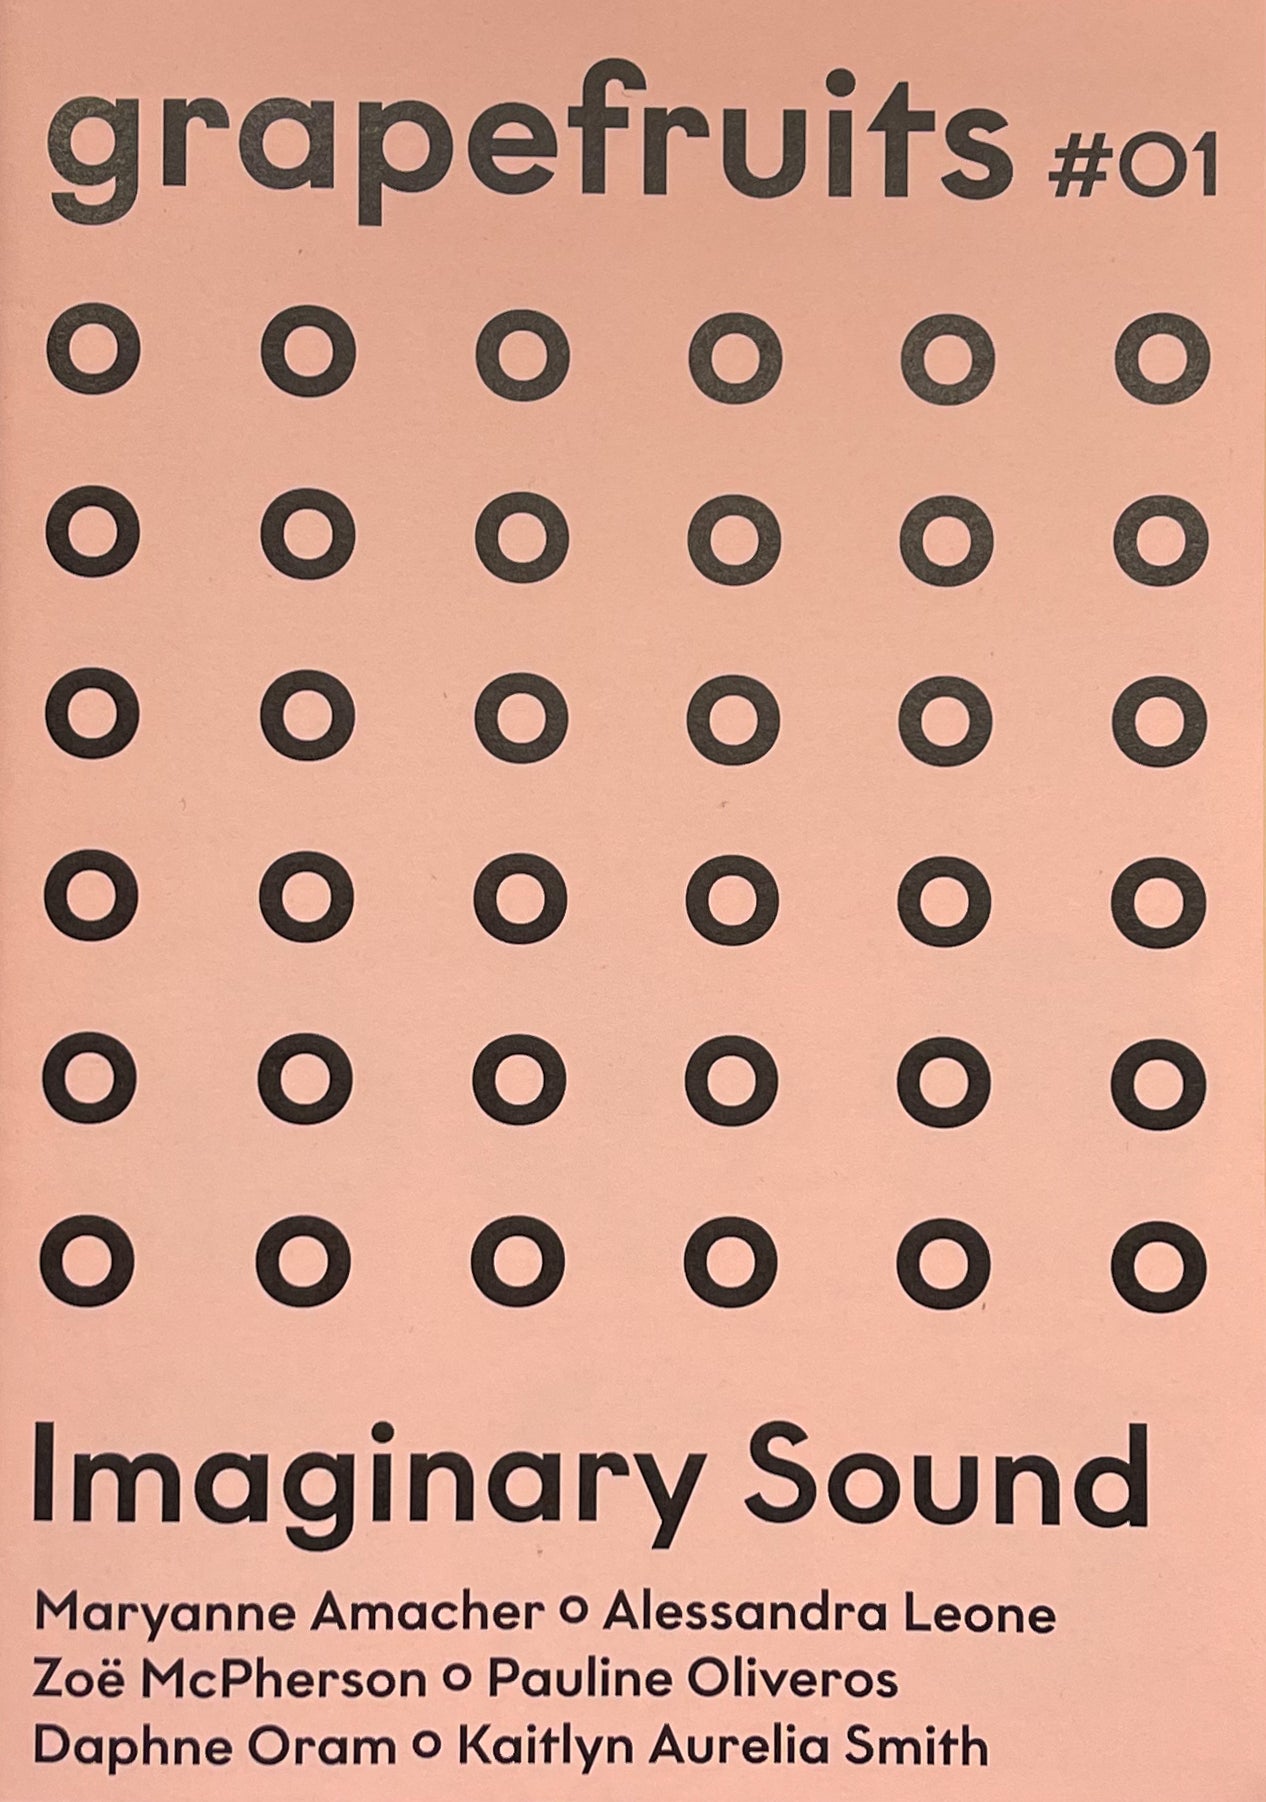 grapefruits Issue #01 on Imaginary Sound